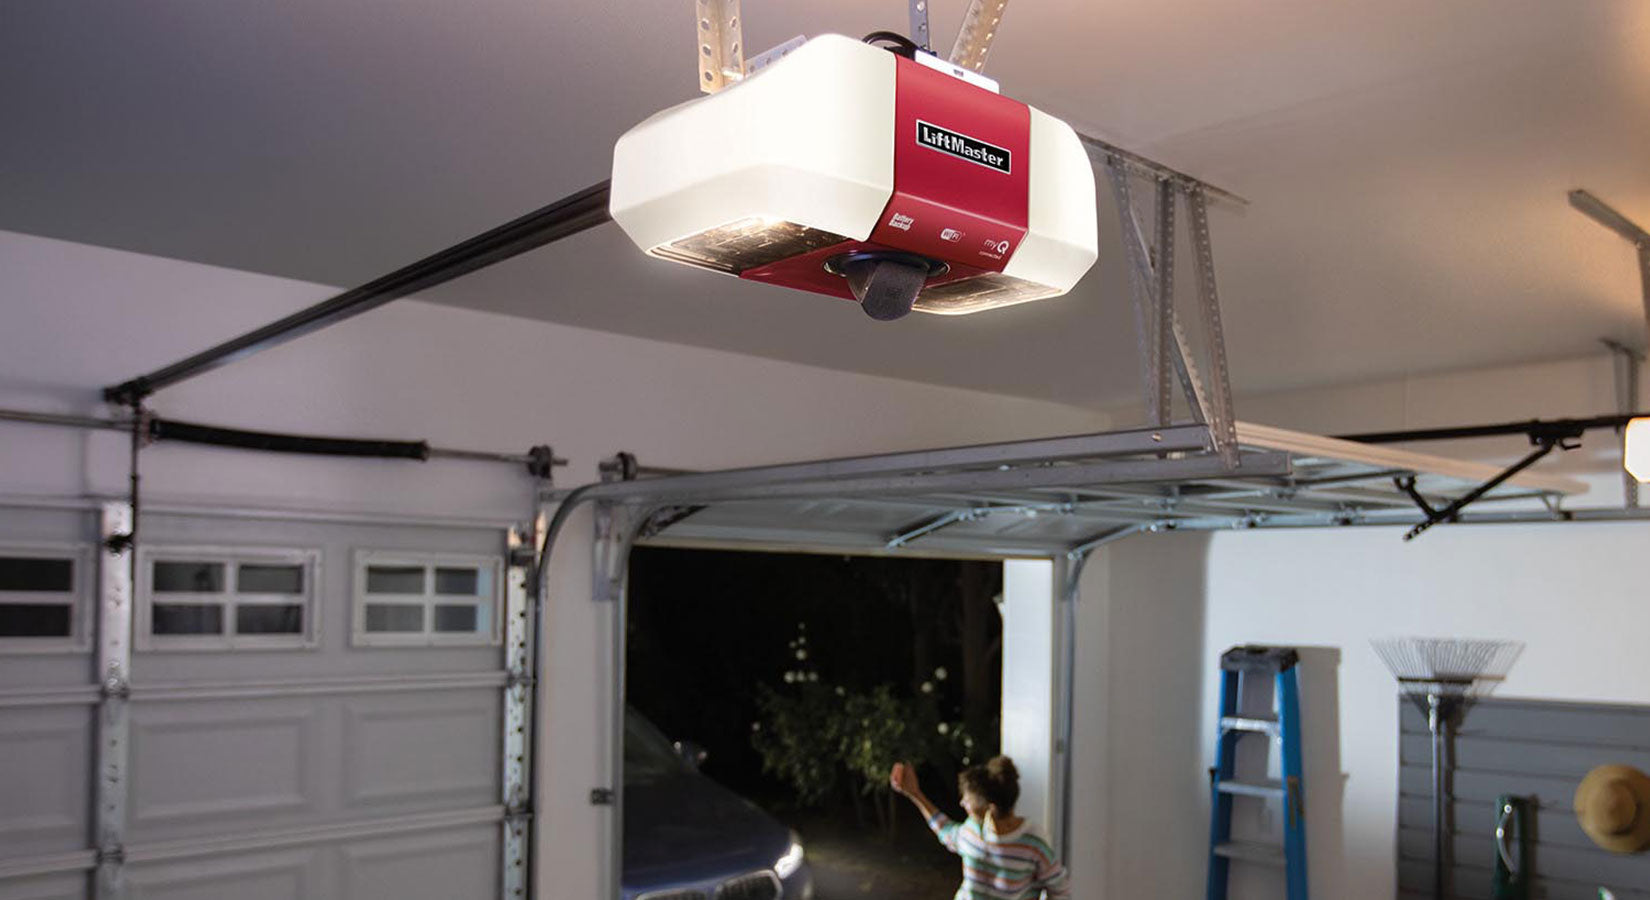 LiftMaster Product Updates | All Security Equipment